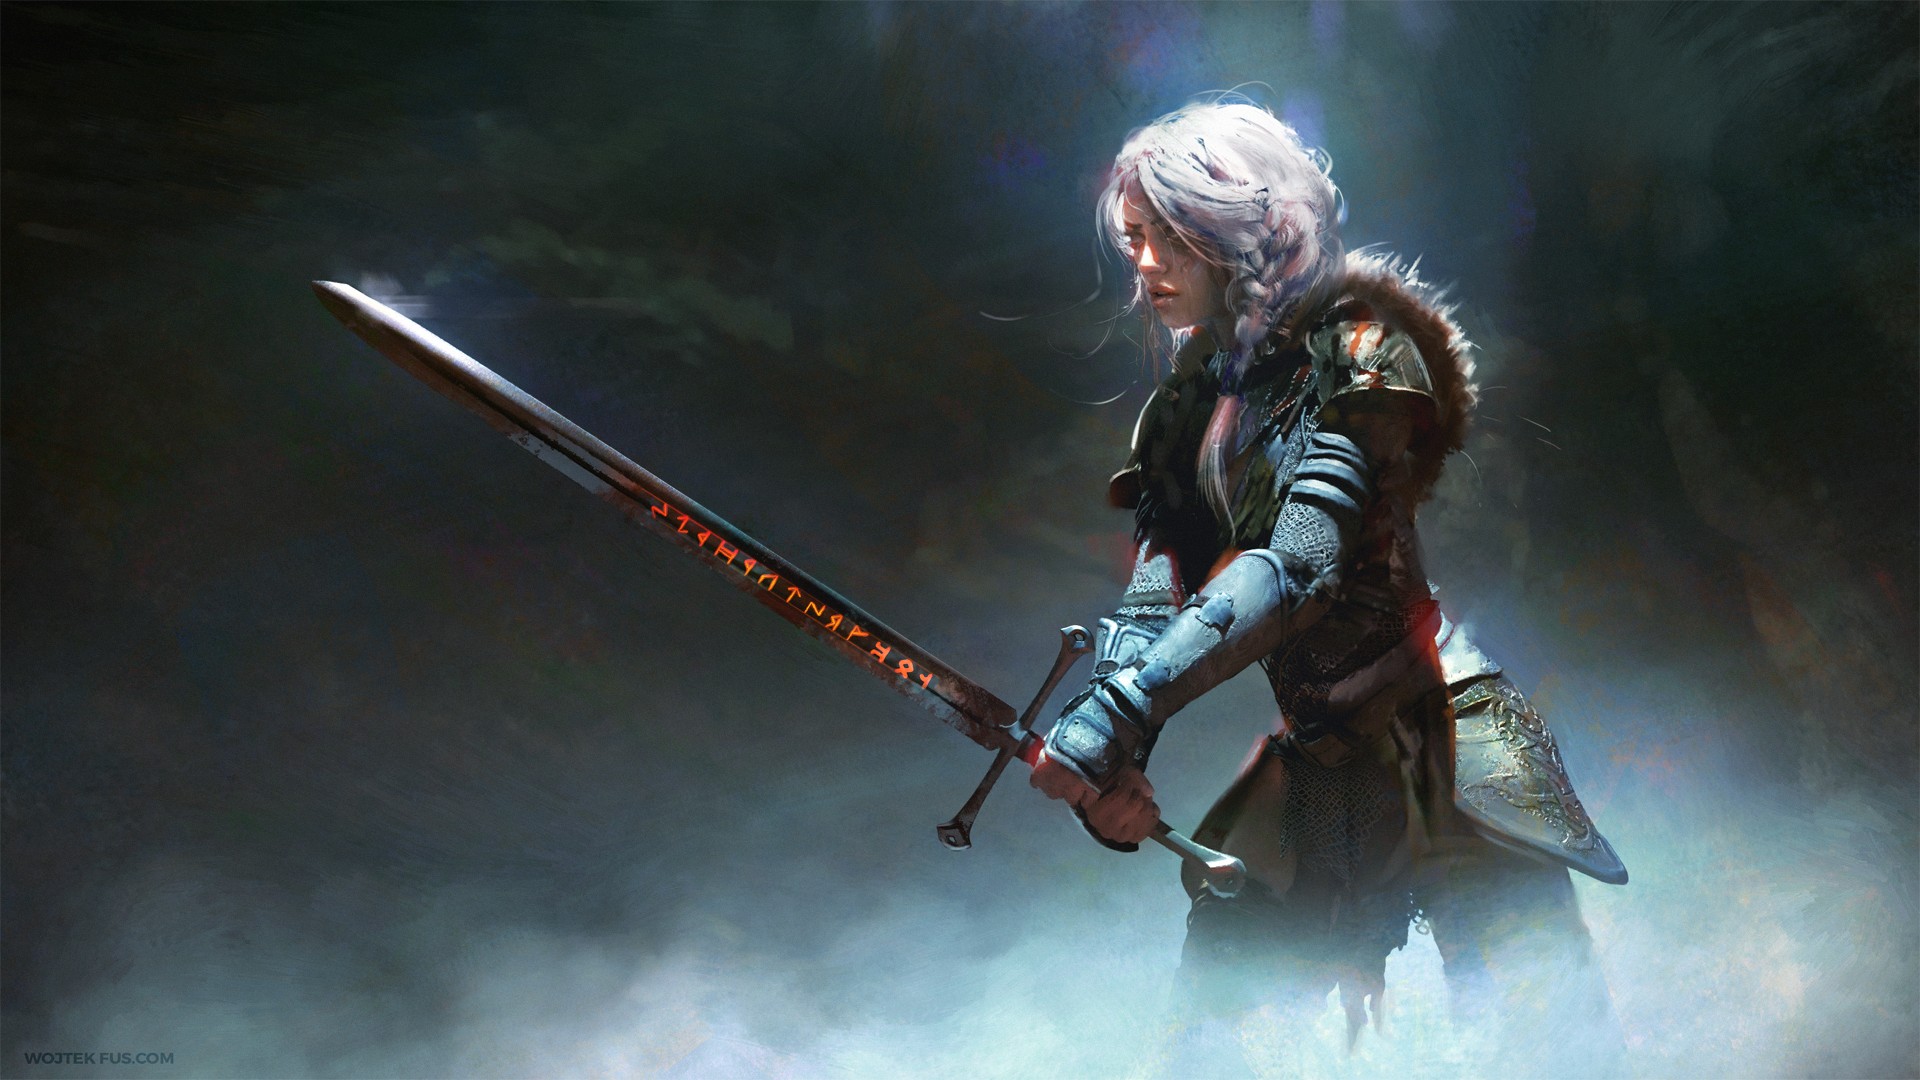 Witcher wallpaper ·① Download free awesome High Resolution backgrounds